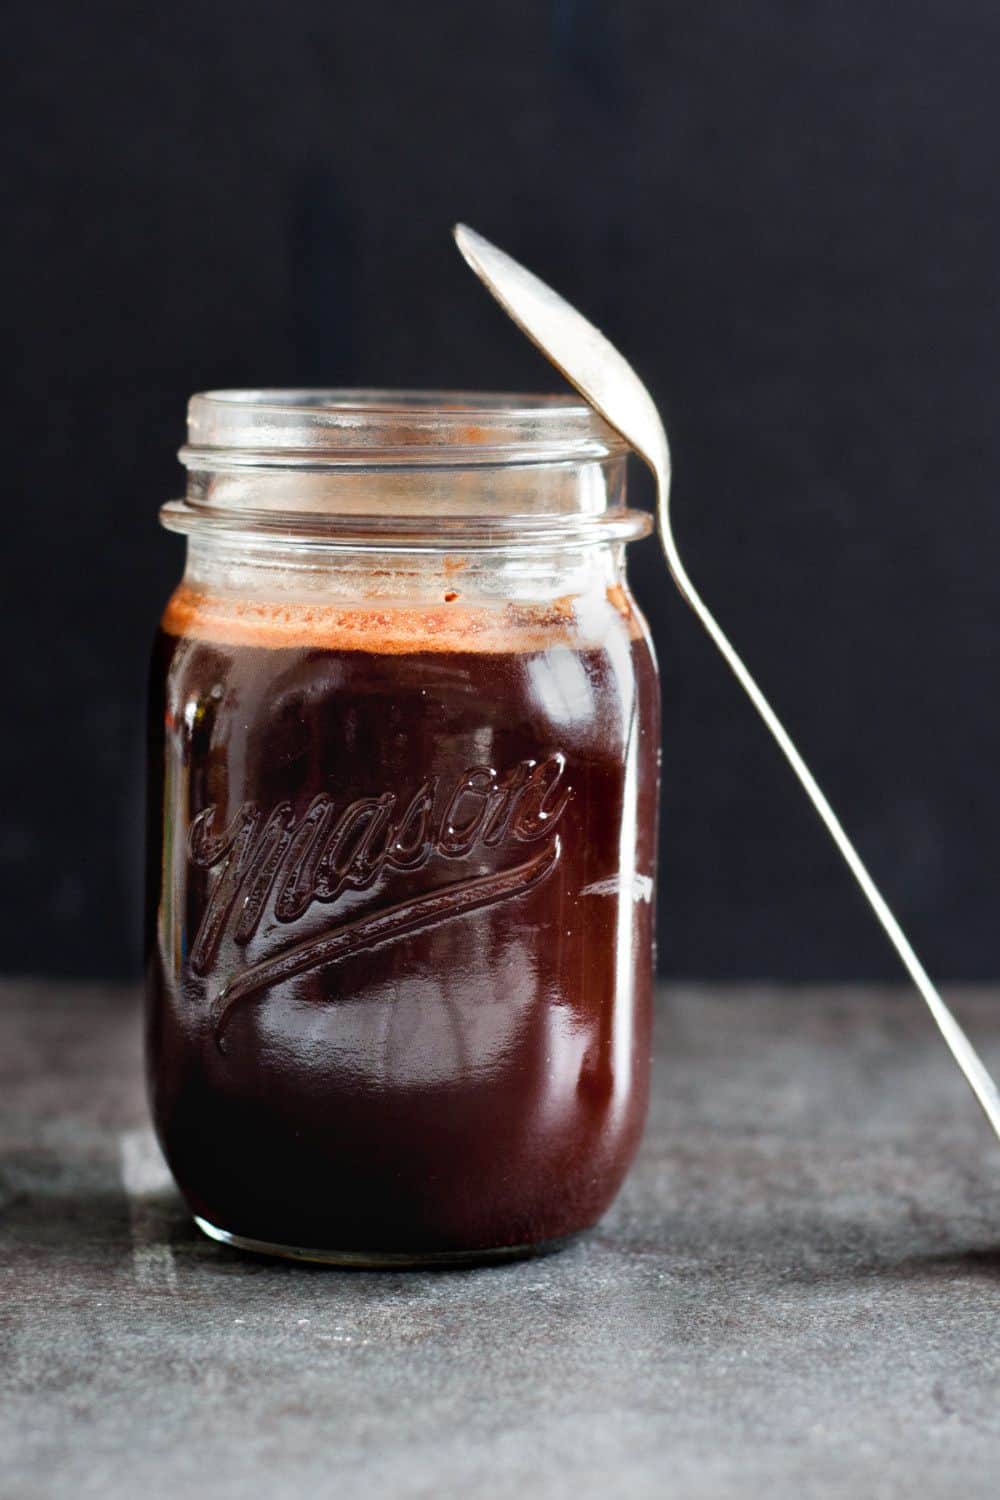 Make your own chocolate sauce - with no corn syrup! Cooks up in minutes, and is ready to make easy chocolate milk or drizzle over ice cream, into coffee or hot chocolate, or over cakes or cupcakes! Recipe on GoodieGodmother.com